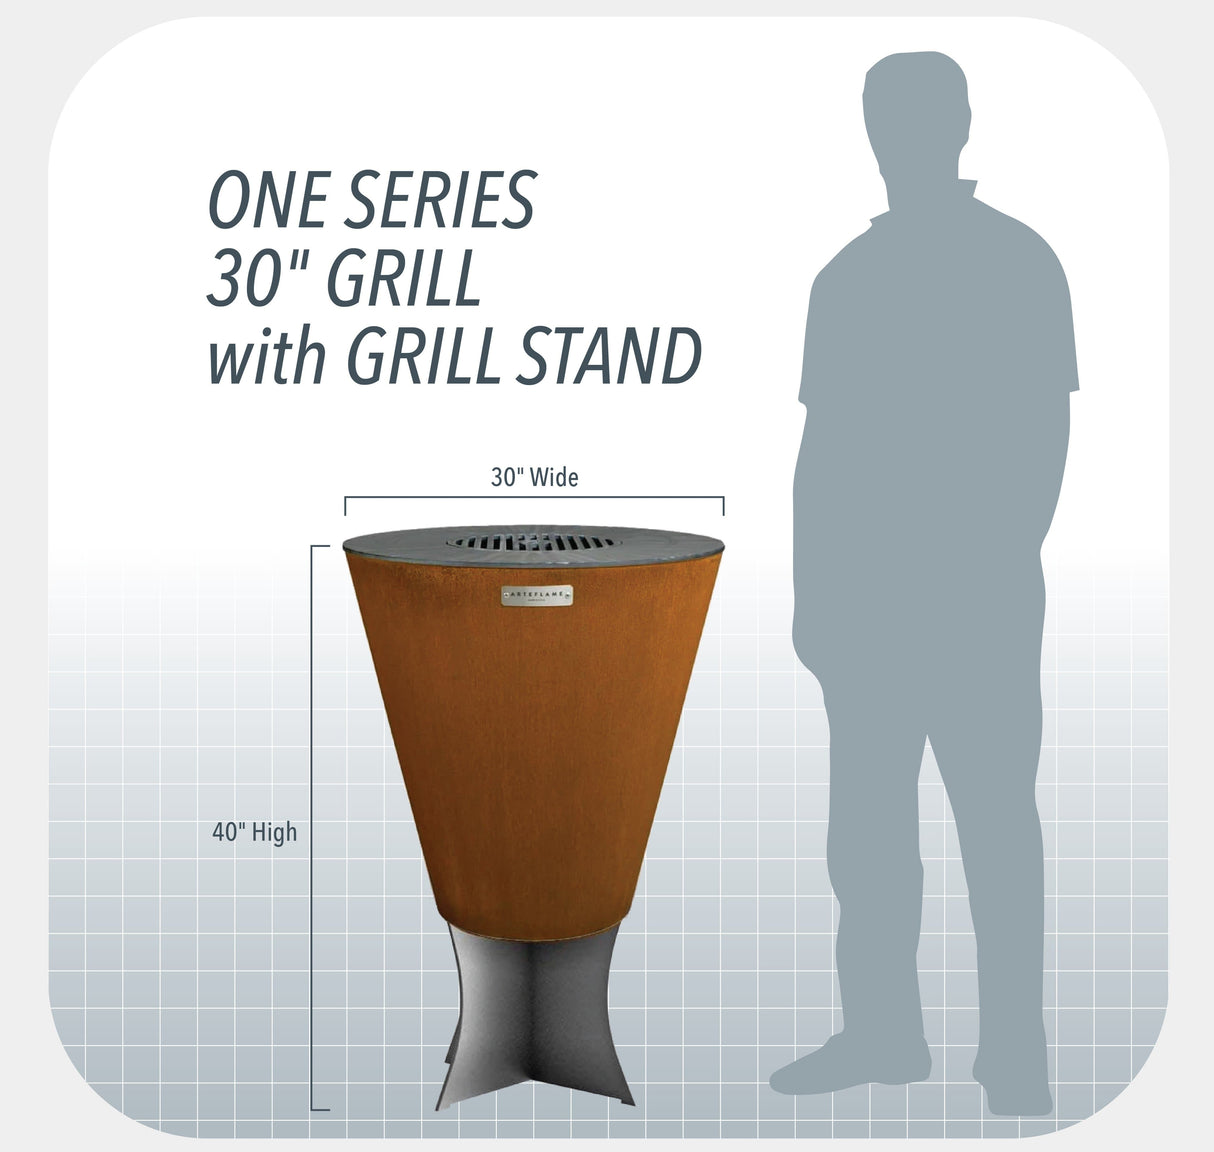 One20 and One30 Grill Stands in Use.